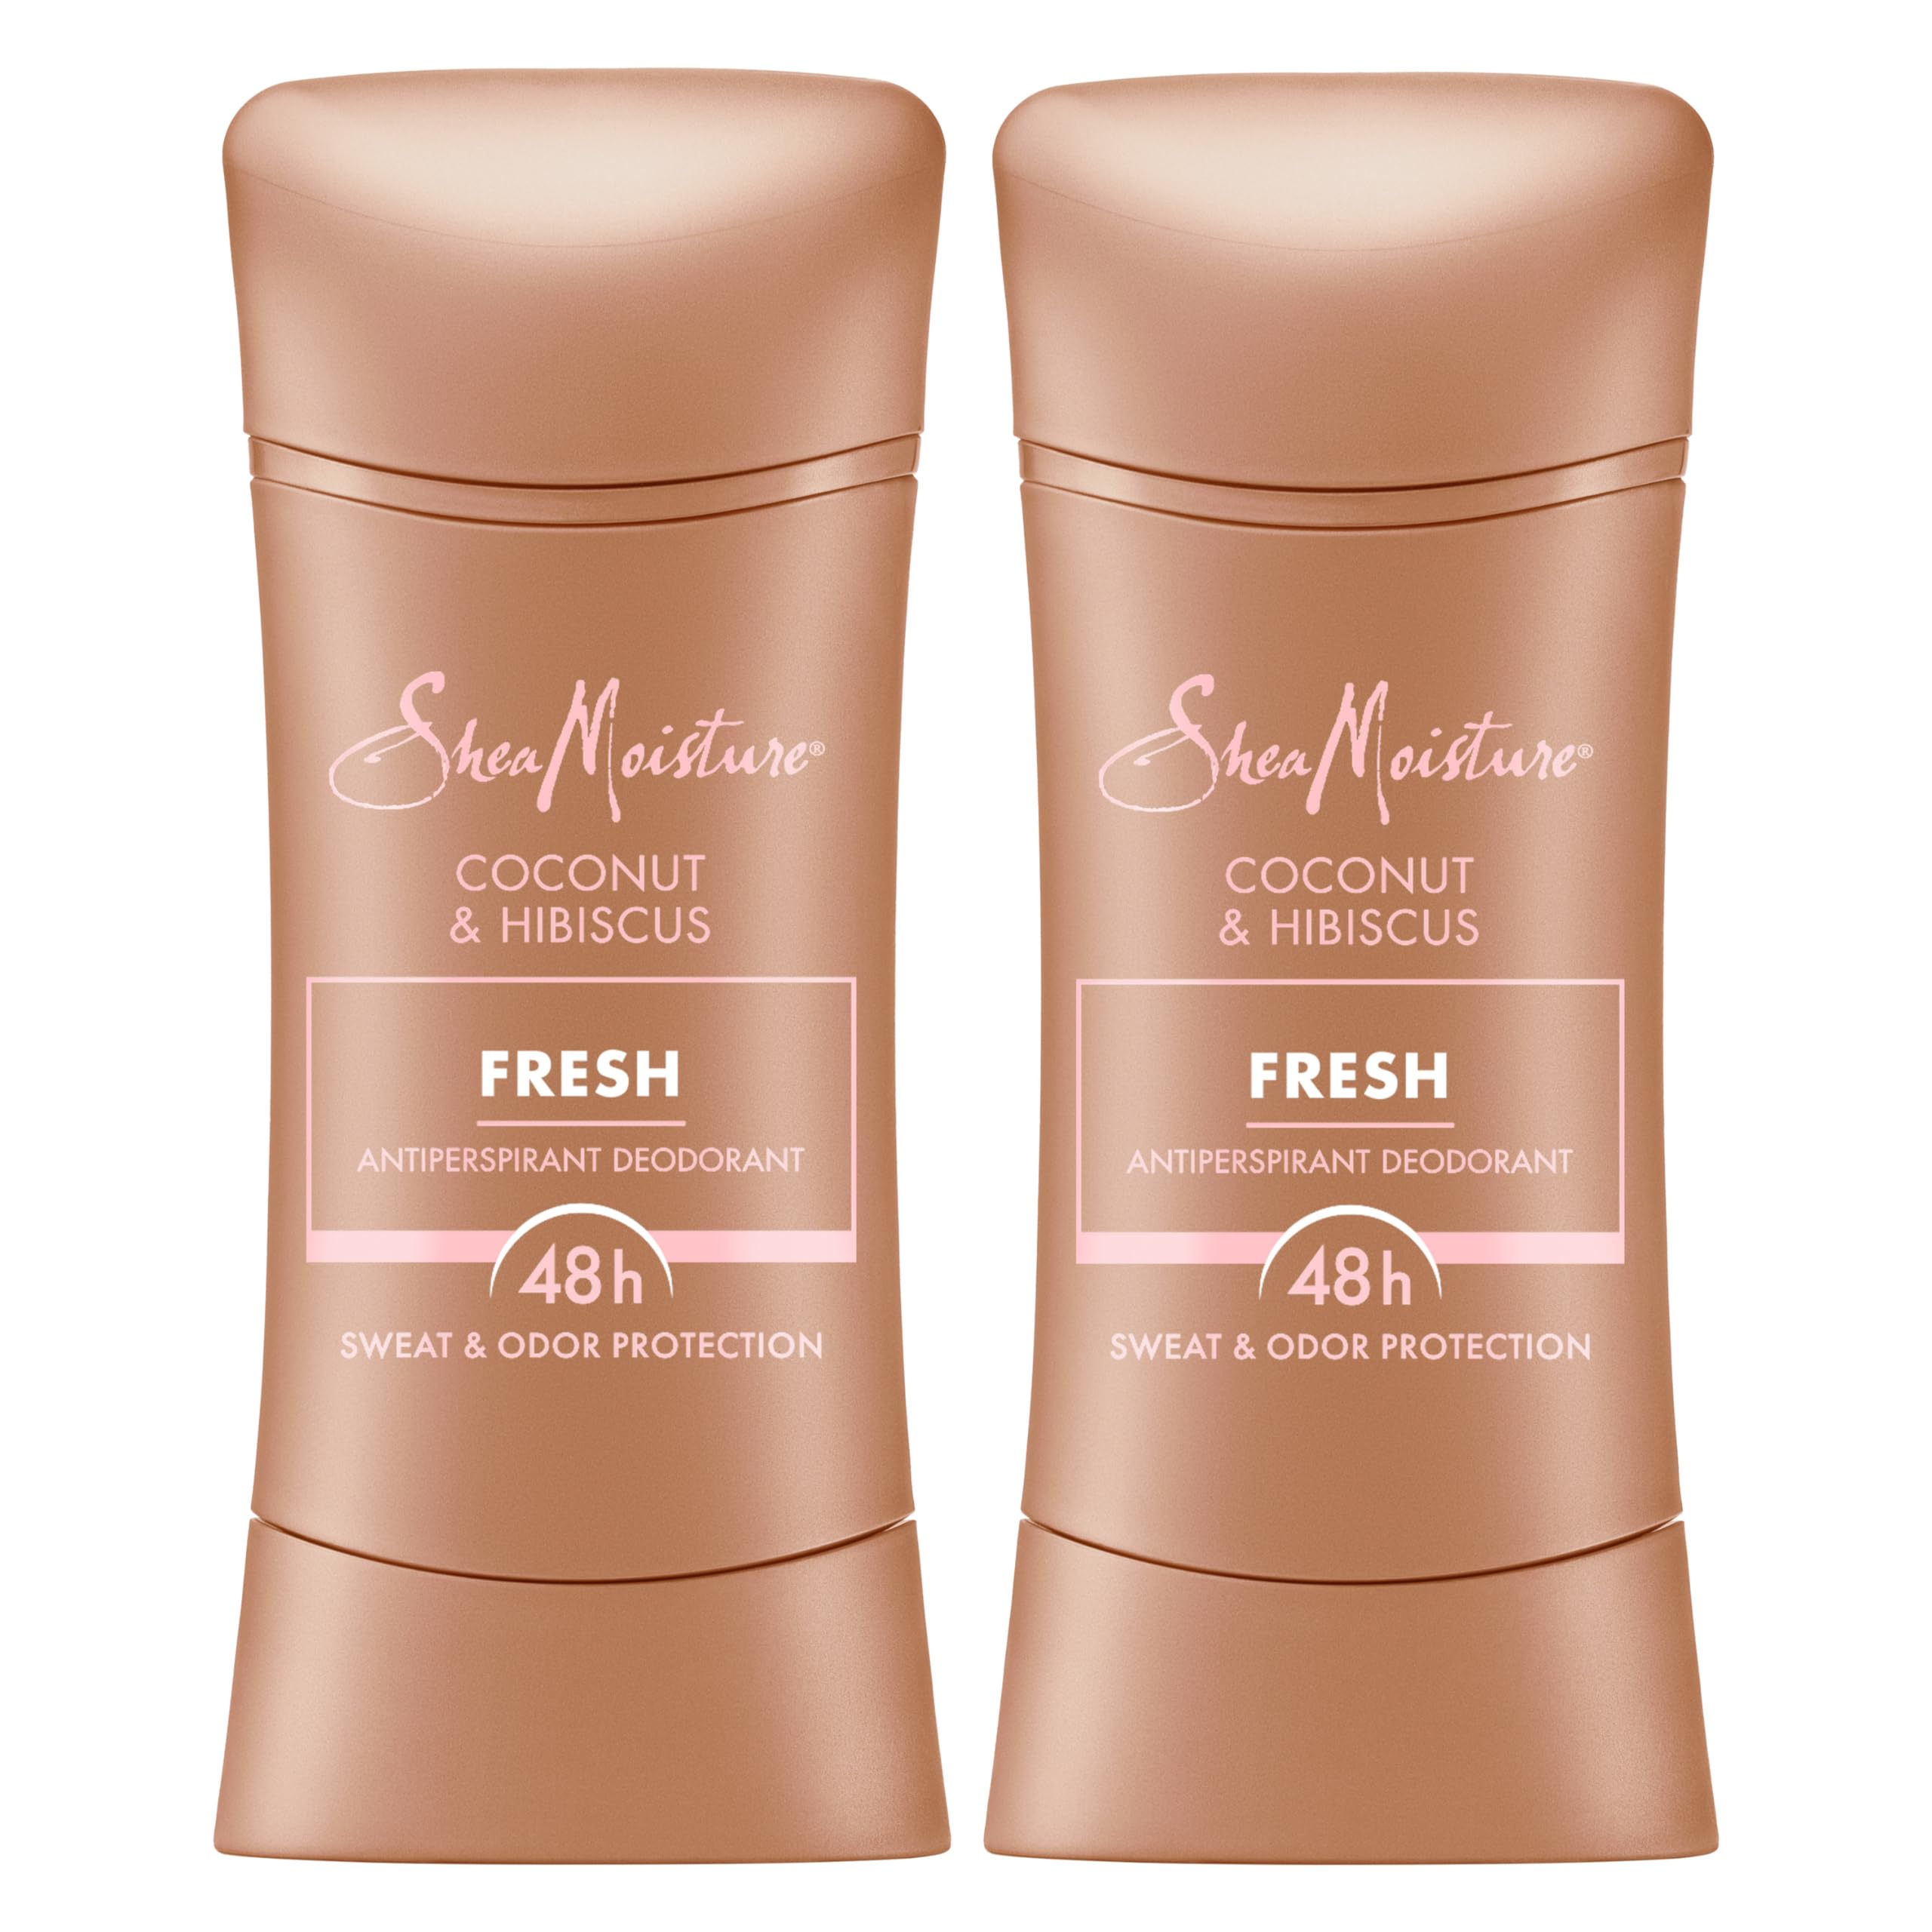 SheaMoisture Antiperspirant Deodorant Stick Fresh Coconut & Hibiscus 2 Count for 48HR Sweat & Odor Protection with No Parabens & No Mineral Oil 2.6 oz